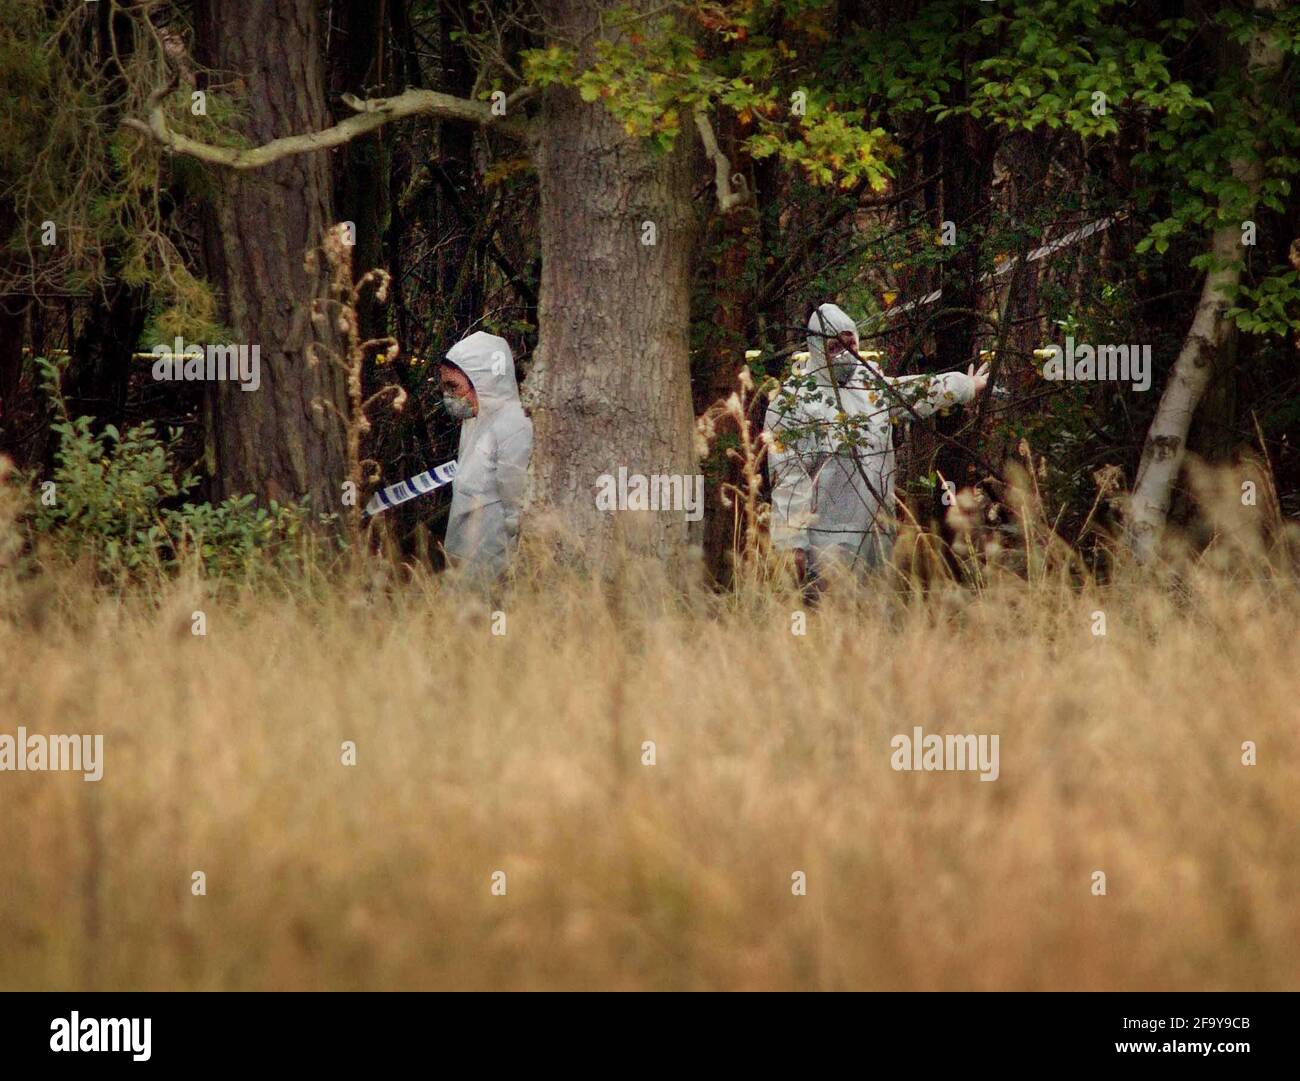 POLICE EXAMINING HUMAN REMAINS IN A WOOD NR YATELEY IN HAMPSHIRE . 20/9/02 PILSTON Stock Photo